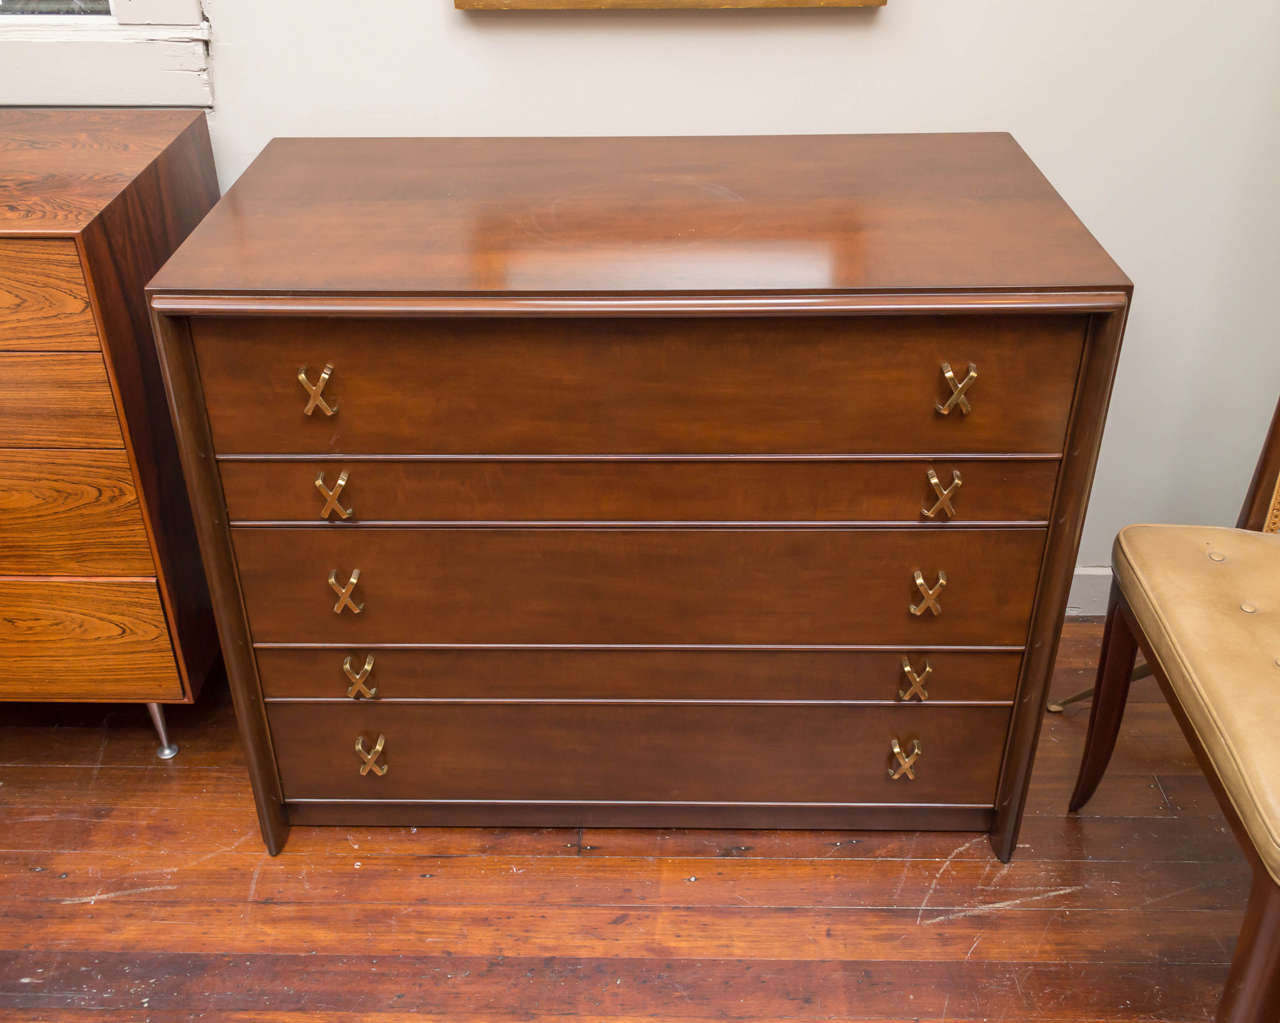 Pair of refined chests designed by Paul Frankl for Johnson Furniture, circa 1950s.
Classical styling with great scale and functionality, with five deep drawers for storage. High quality construction and perfectly refinished in dark espresso with